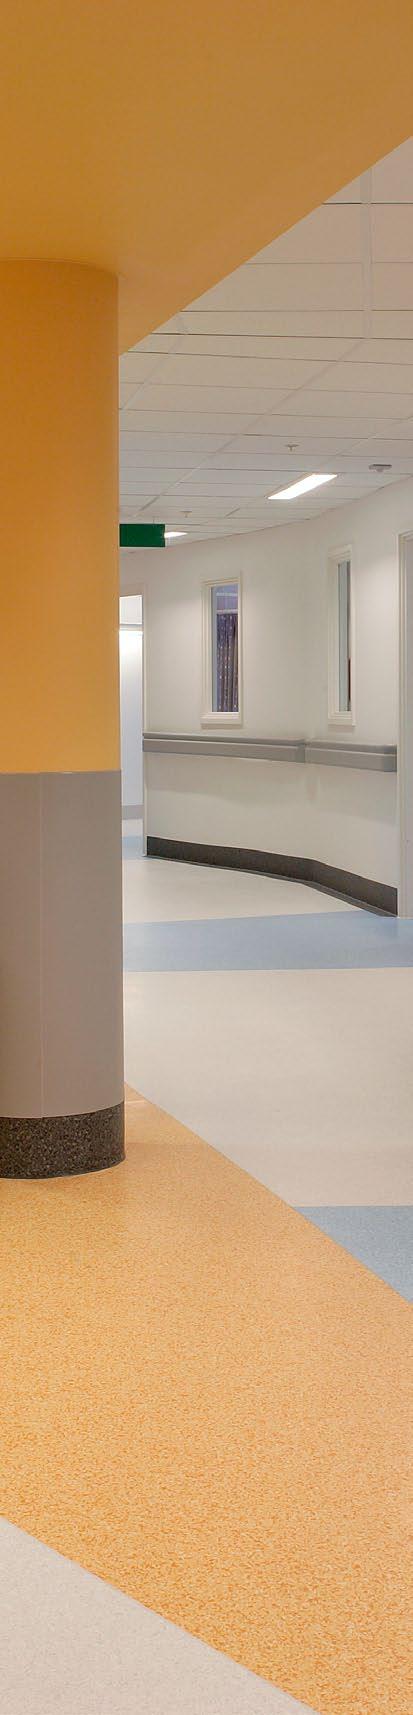 MediCare Plus Durable, acoustic ceiling solutions that fulfil stringent hygiene requirements in heavily serviced healthcare environments MediCare Plus is HTM 60 compliant in categories 2, 3, 4, 5 and